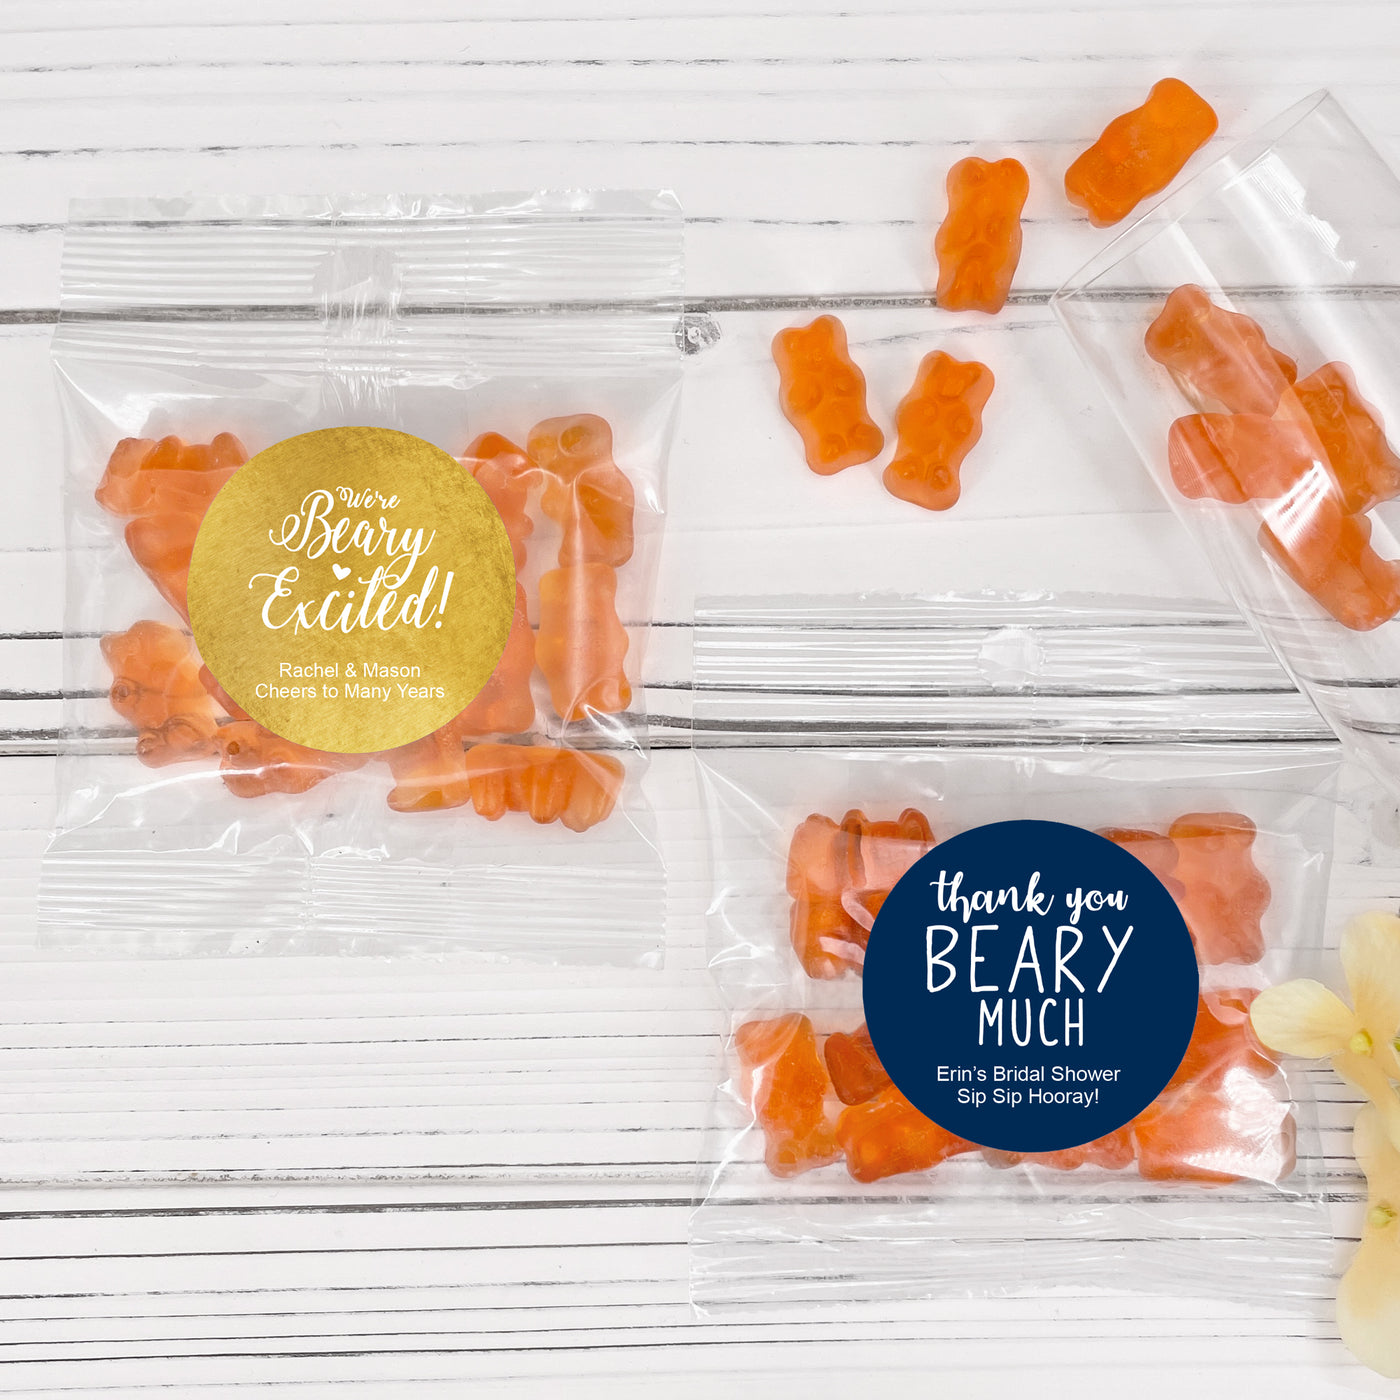 Catchy Sayings Personalized Gummy Bear Favors - Champagne Flavor